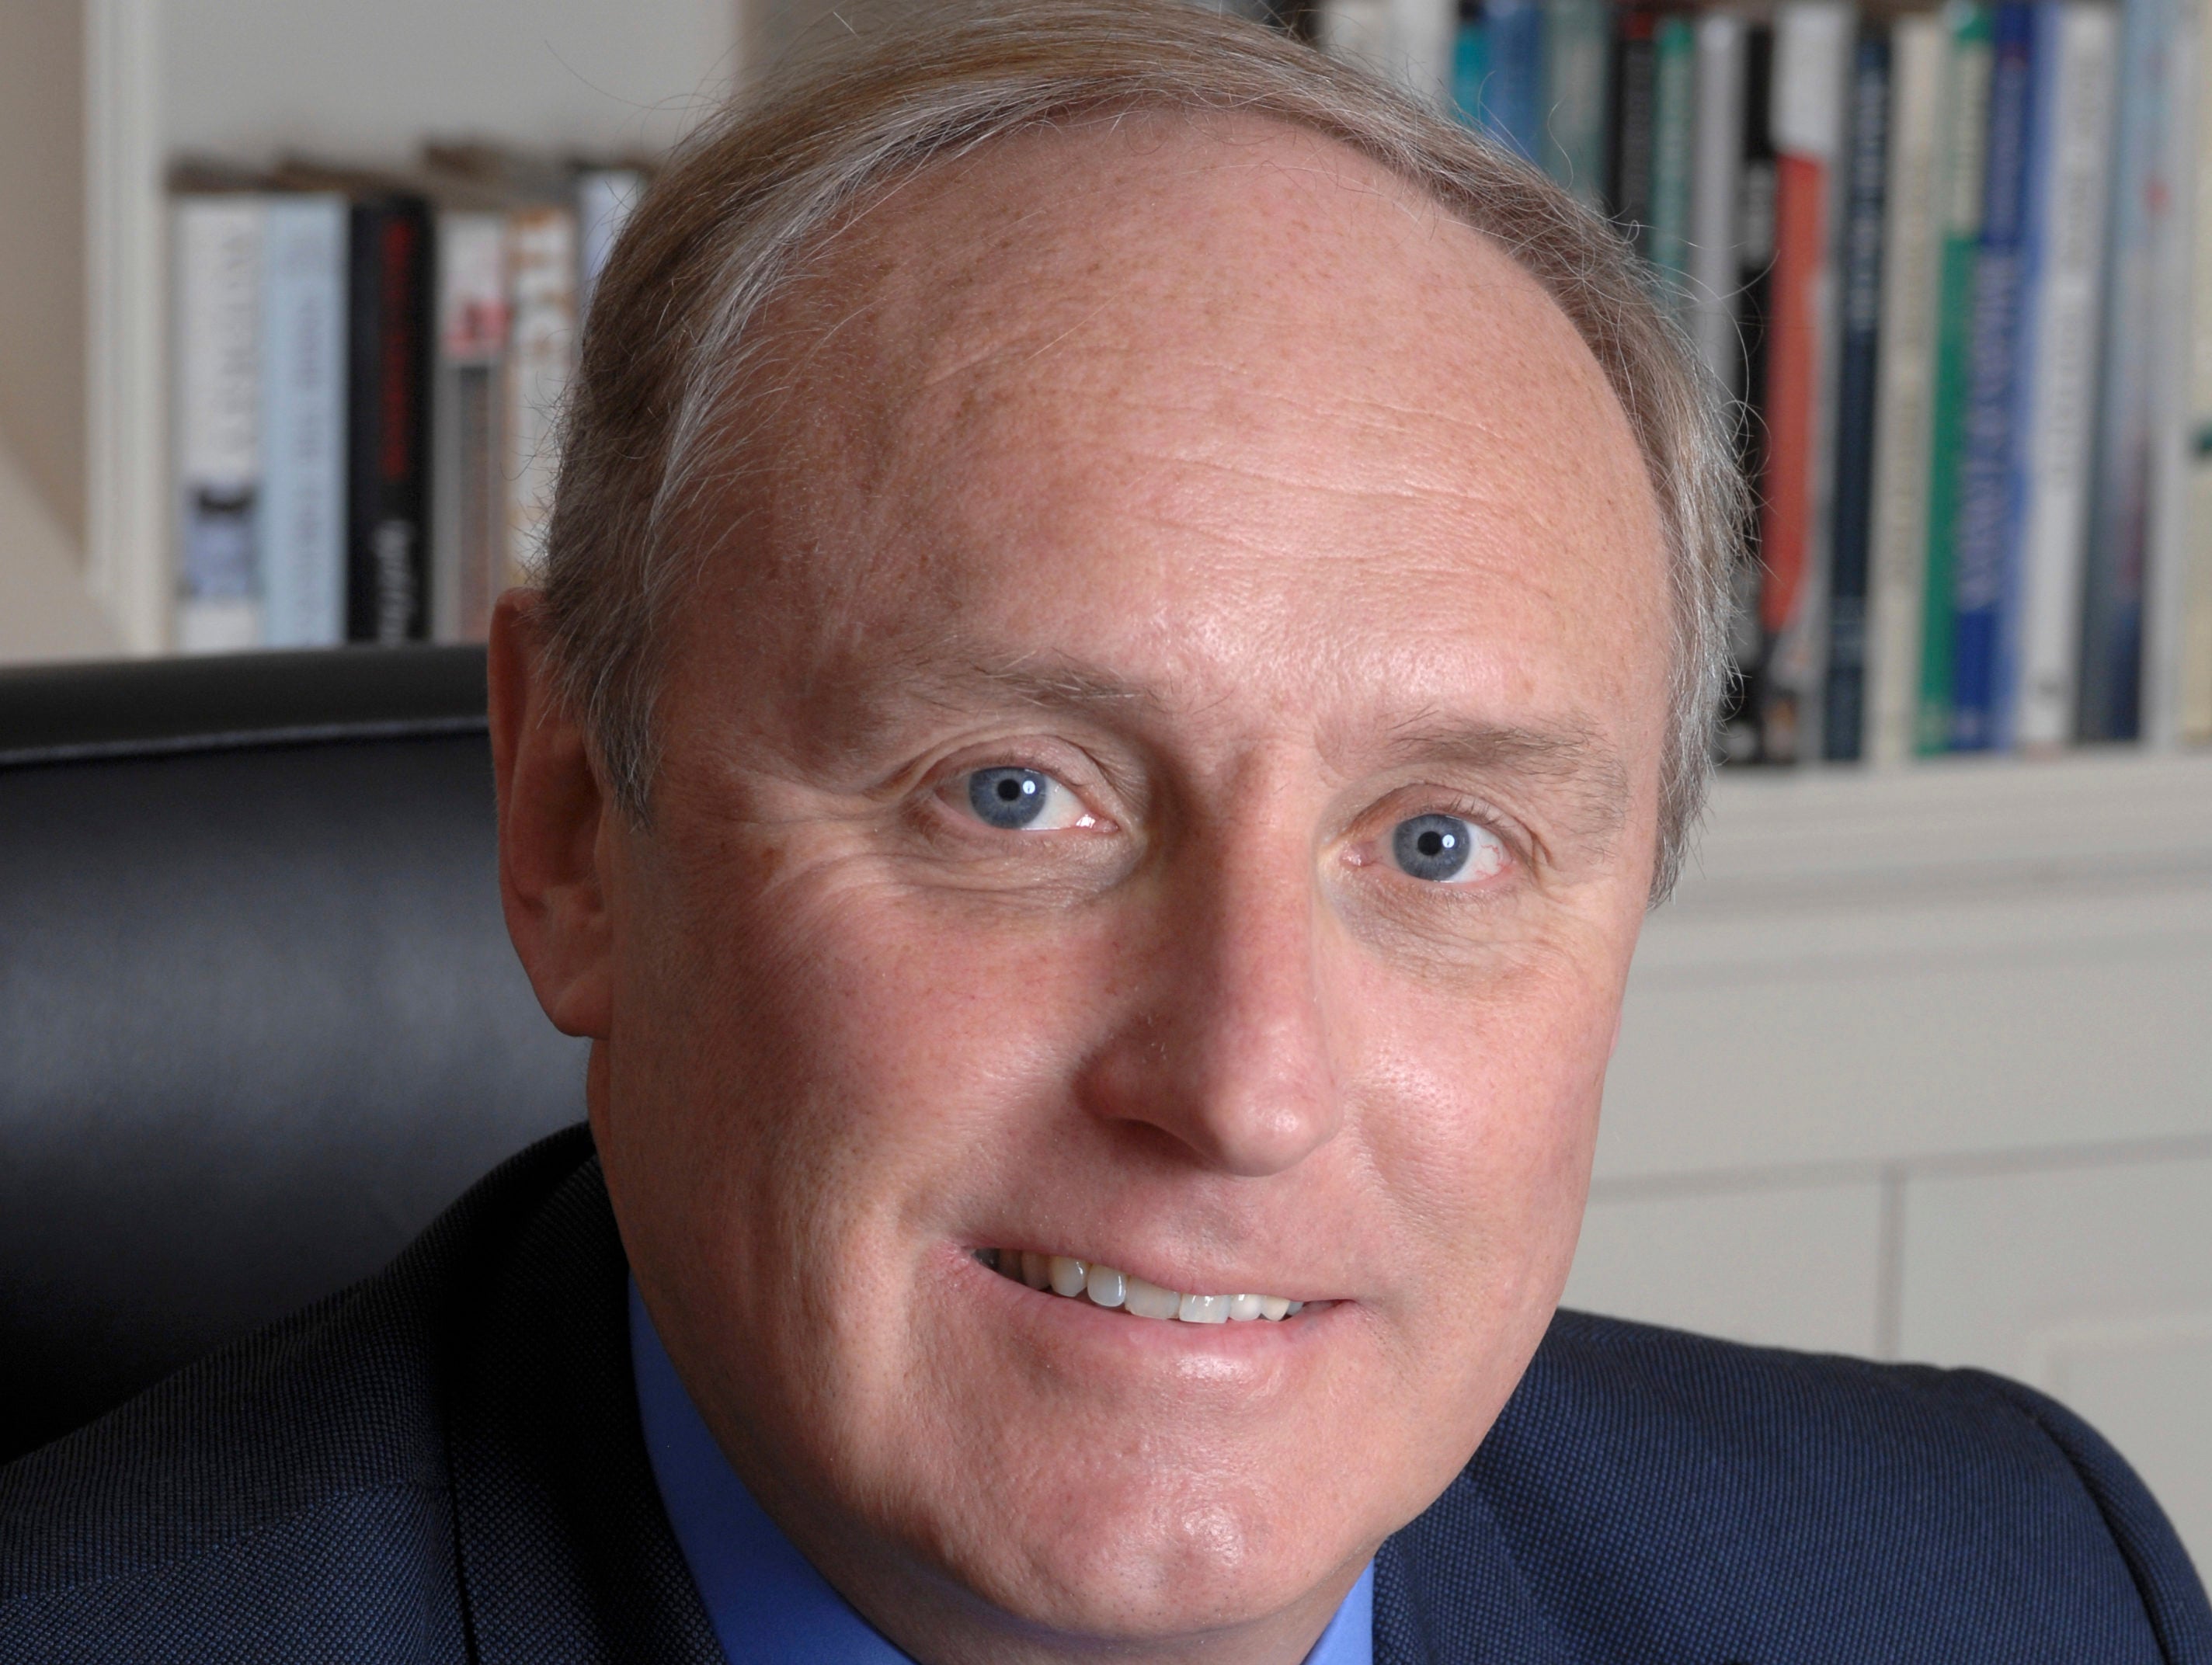 Paul Dacre says leaving speech 'not my style' as he bids farewell to Daily Mail staff in letter pinned to noticeboard